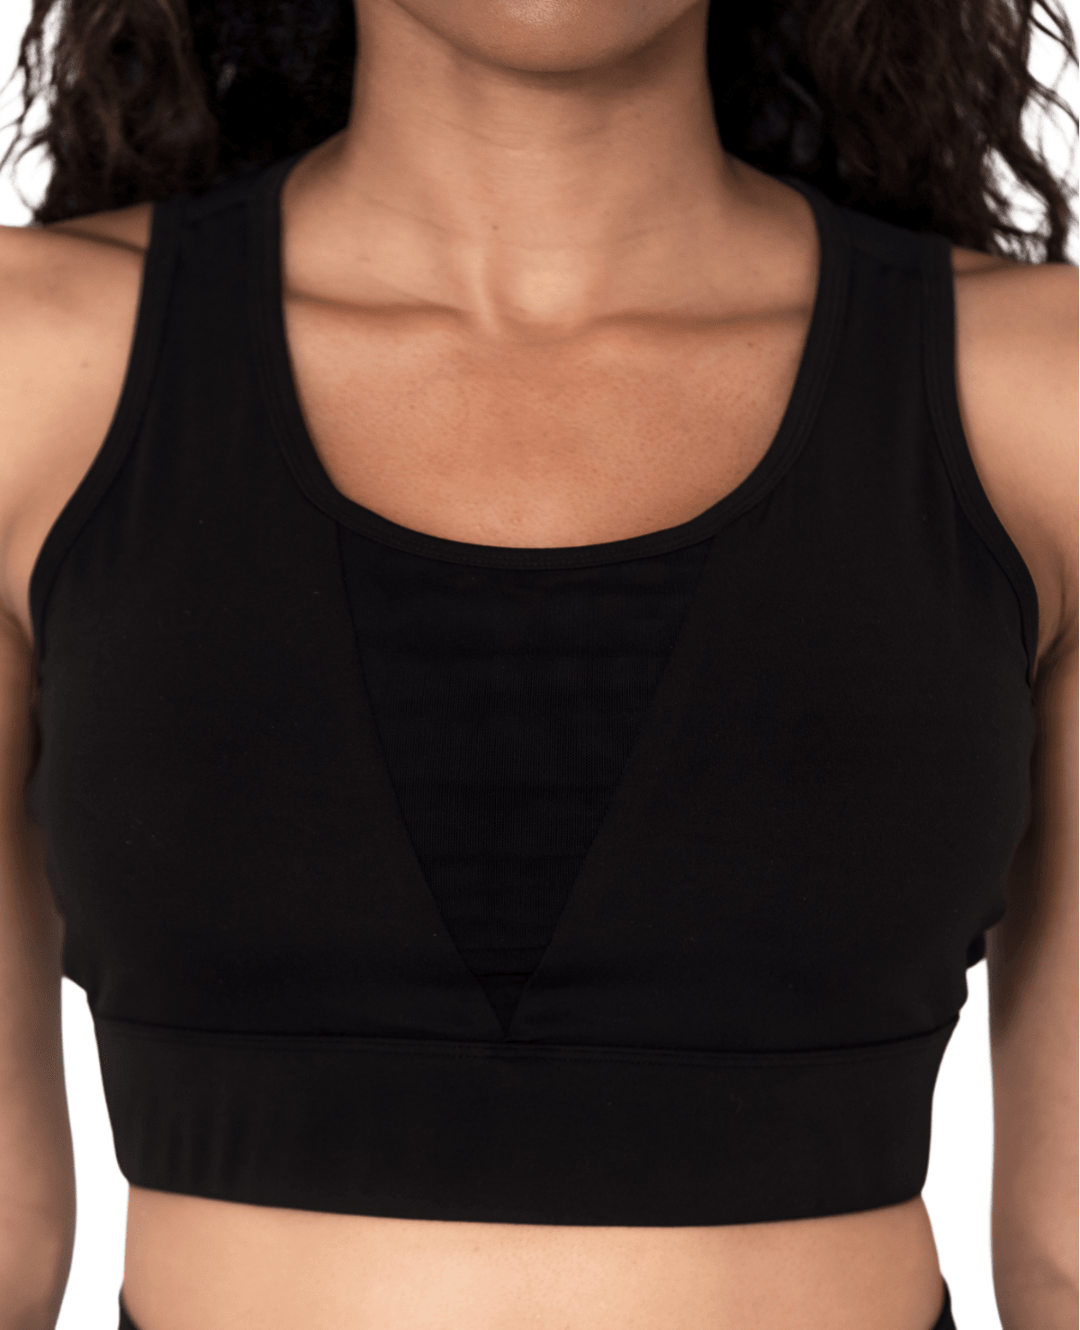 HeyNuts Black Wherever Crop Top with Built In Bra NEW Size XL - $20 New  With Tags - From Kayla